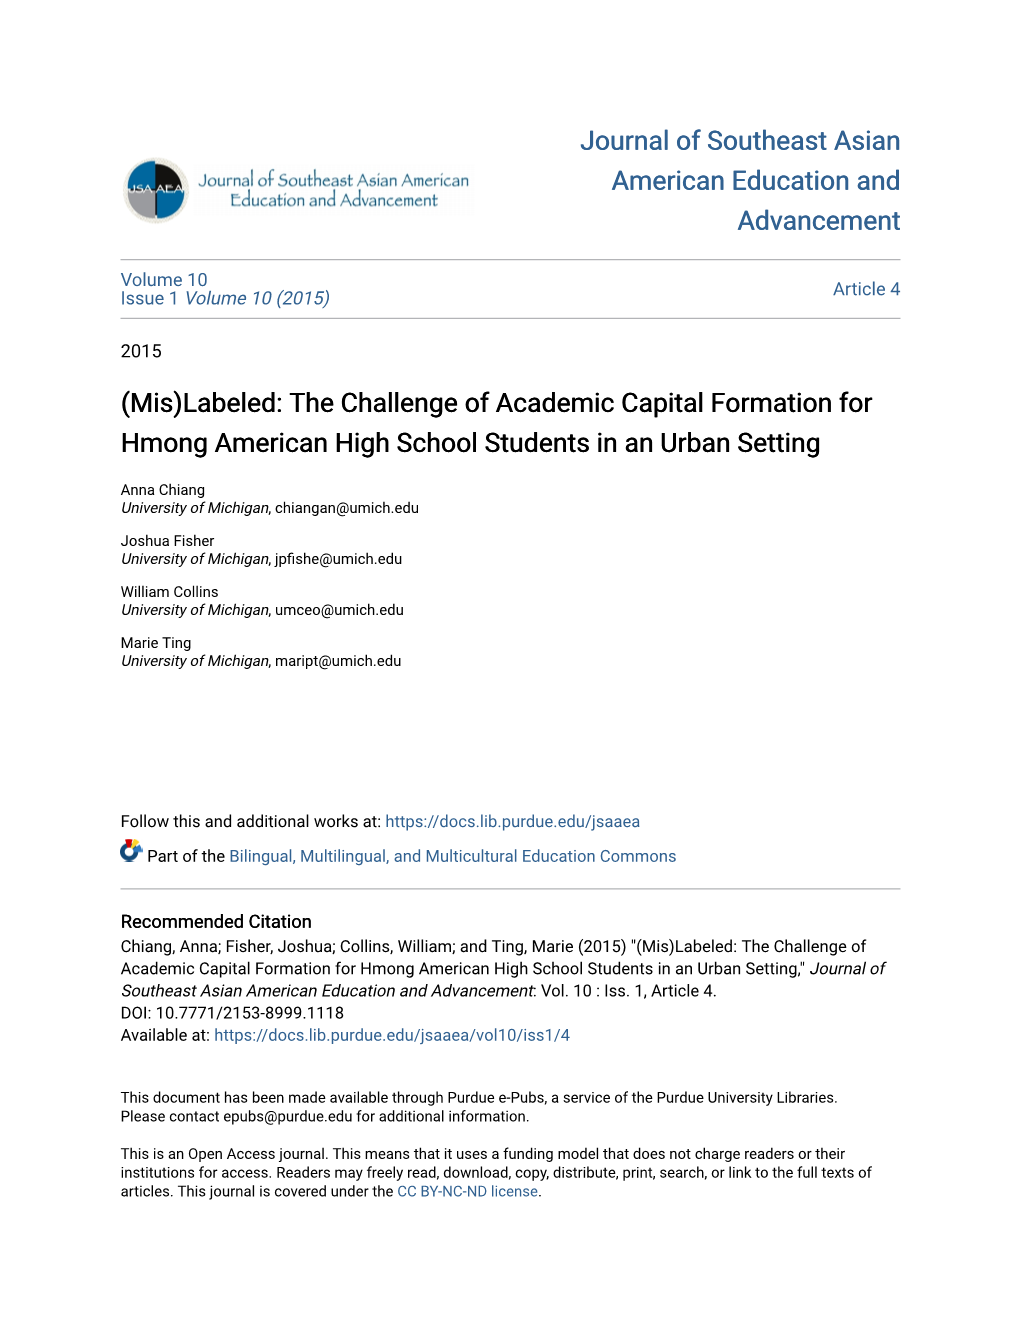 The Challenge of Academic Capital Formation for Hmong American High School Students in an Urban Setting